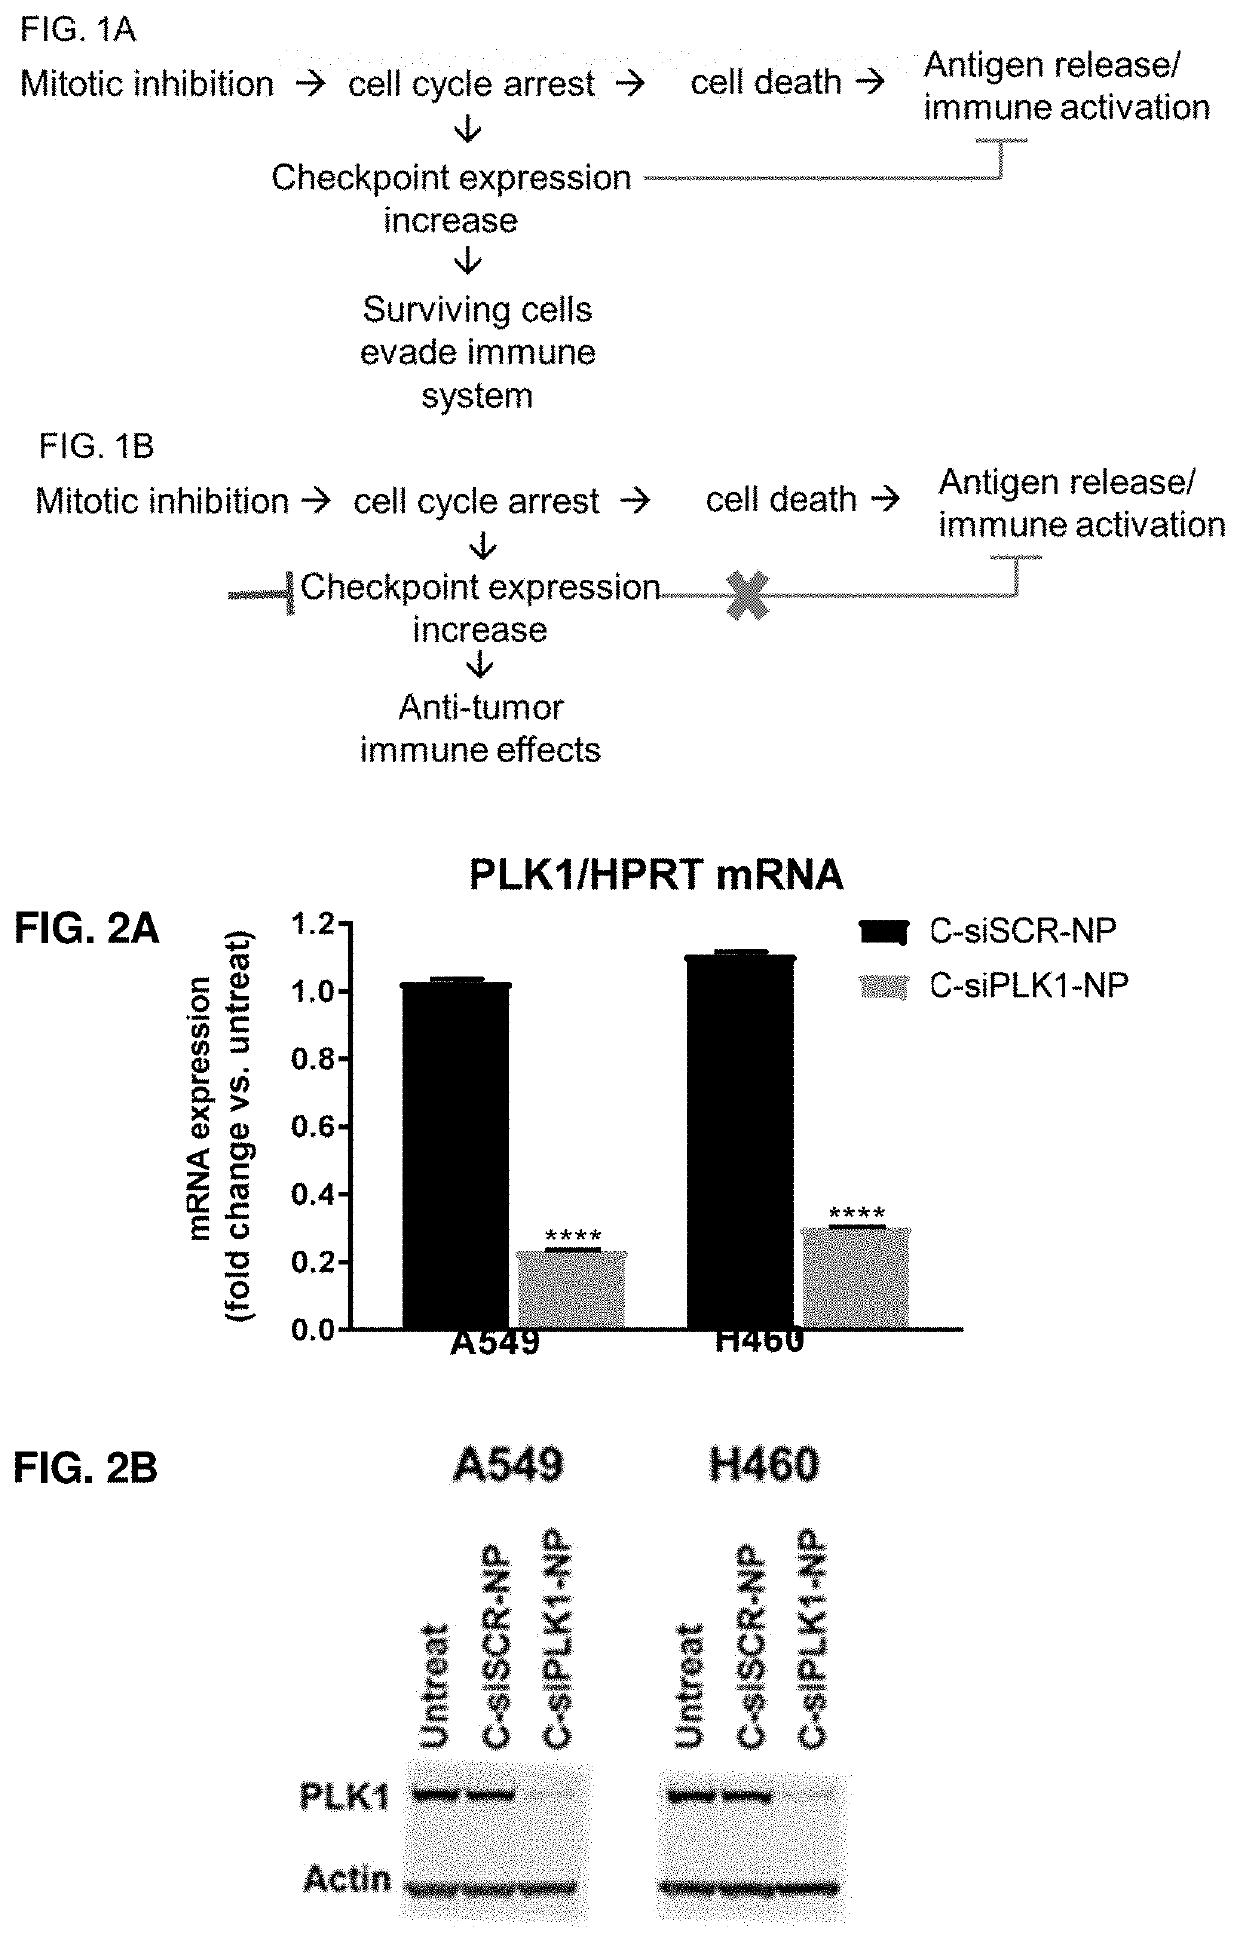 Therapeutic constructs for co-delivery of mitotic kinase inhibitor and immune checkpoint inhibitor